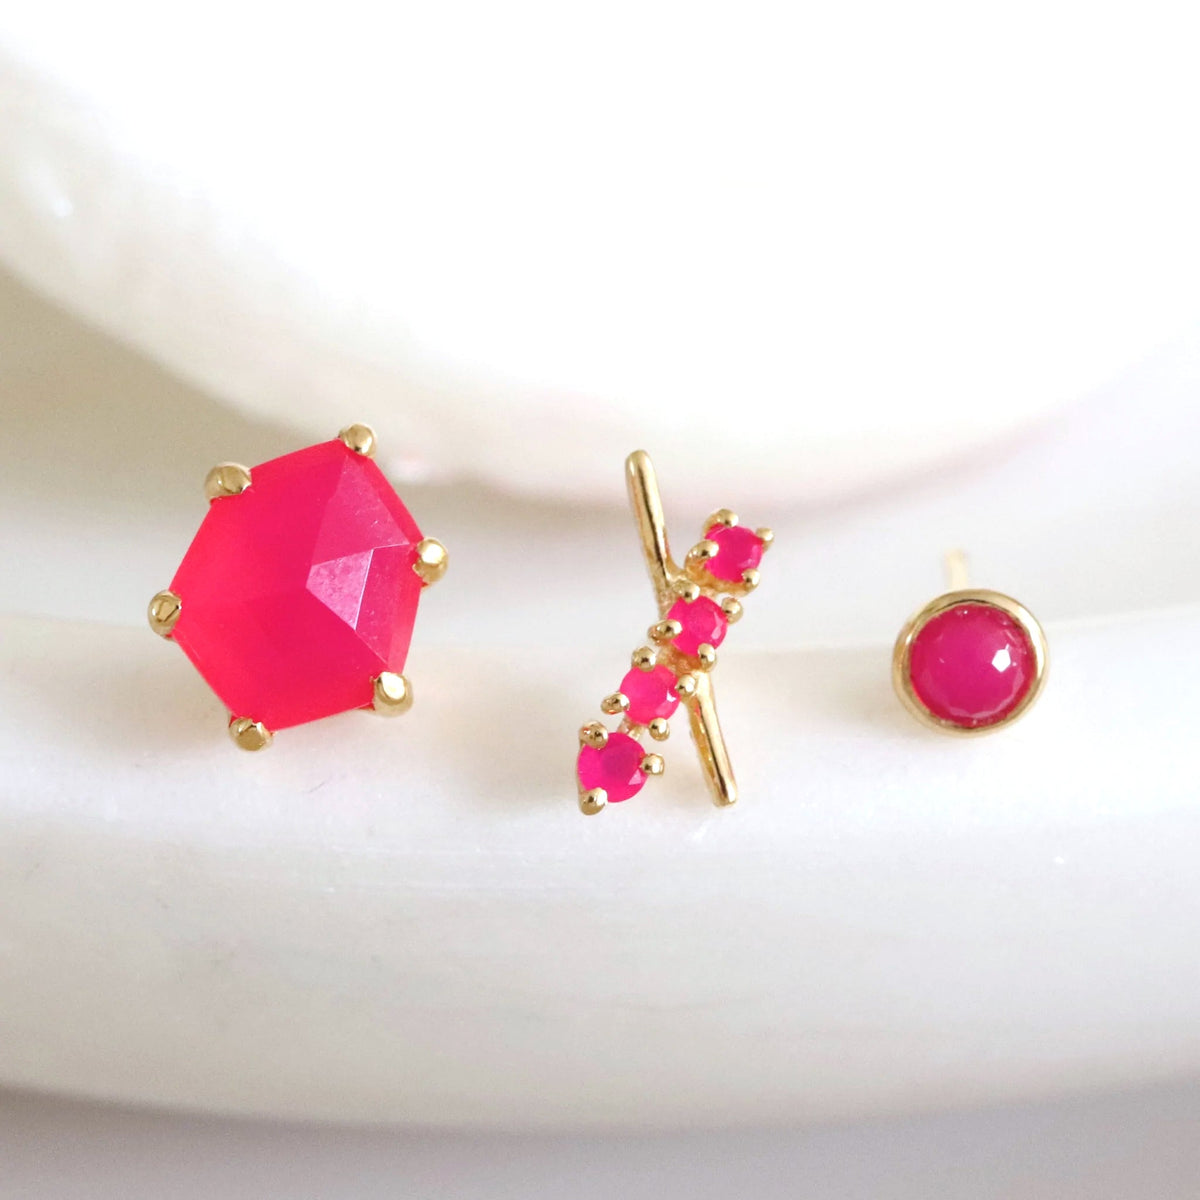 TINY PROTECT STUD EARRINGS - HOT PINK CHALCEDONY &amp; GOLD - SO PRETTY CARA COTTER